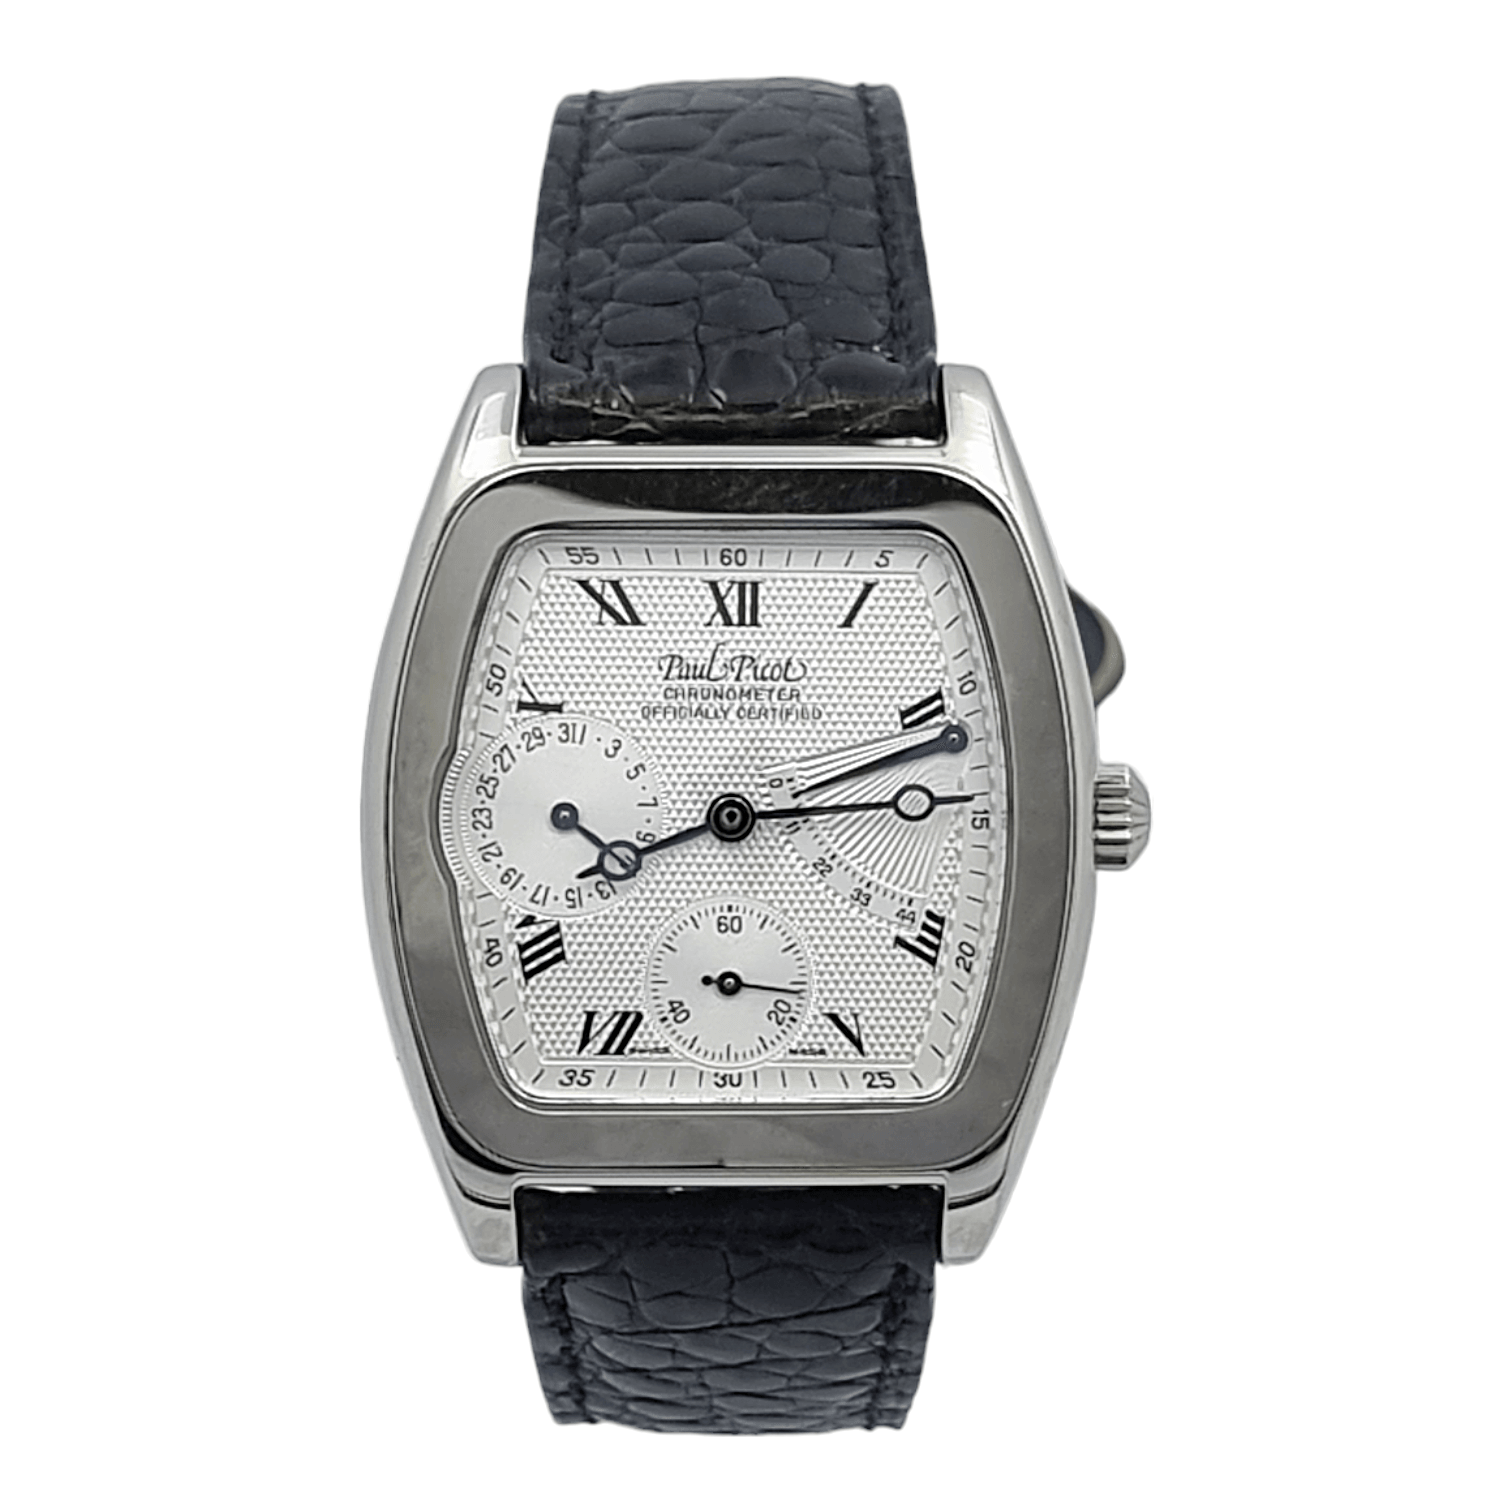 Paul Picot Firshire Chronometer Reserve de Marche Ref. 4034 - ON5577 - LuxuryInStock